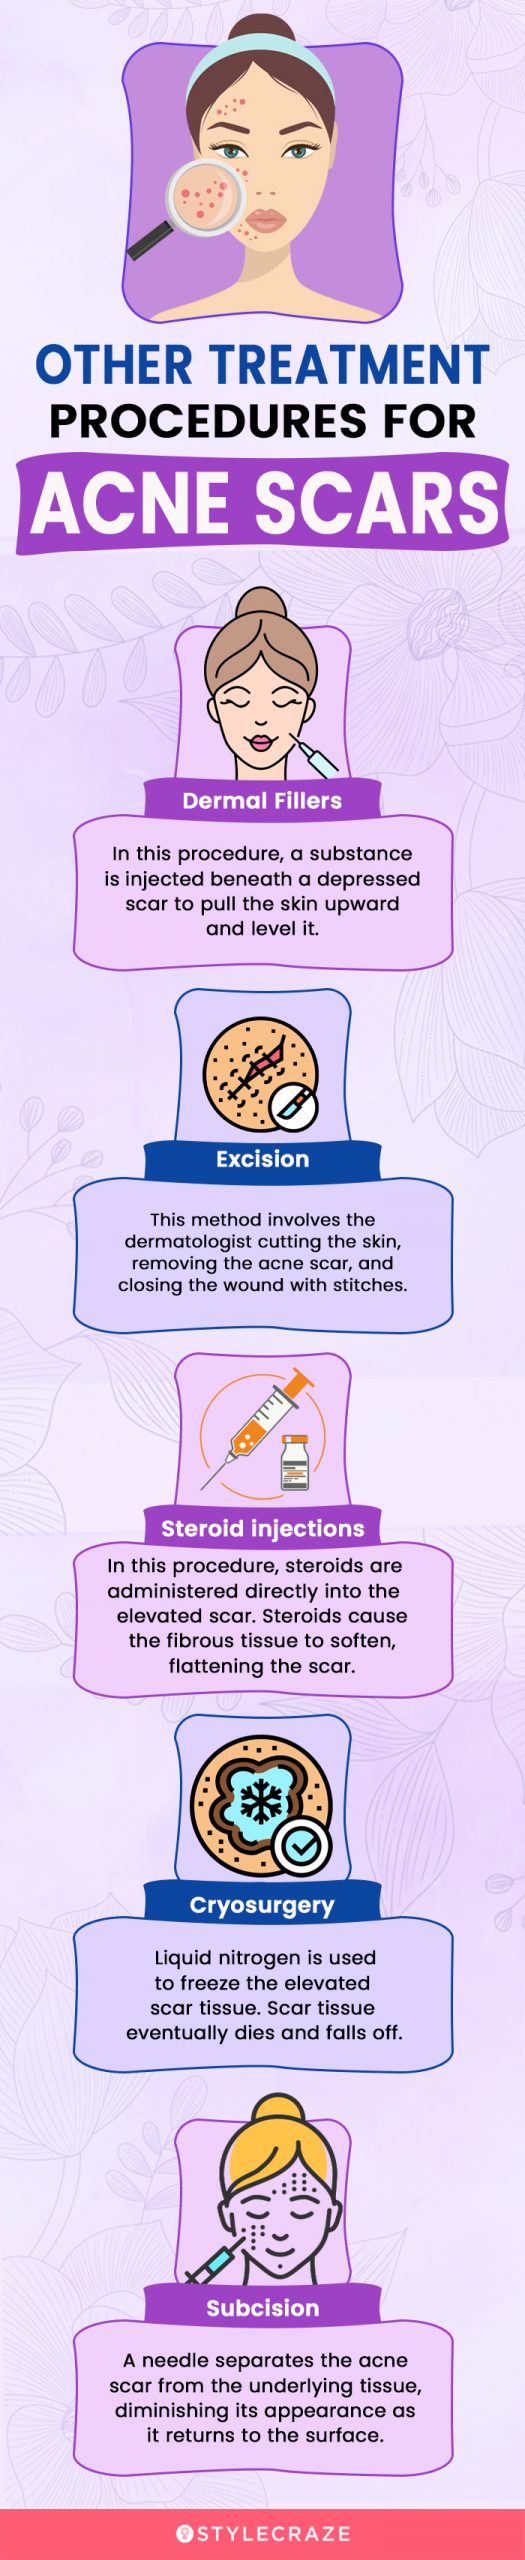 other treatment procedures for acne scars [infographic]